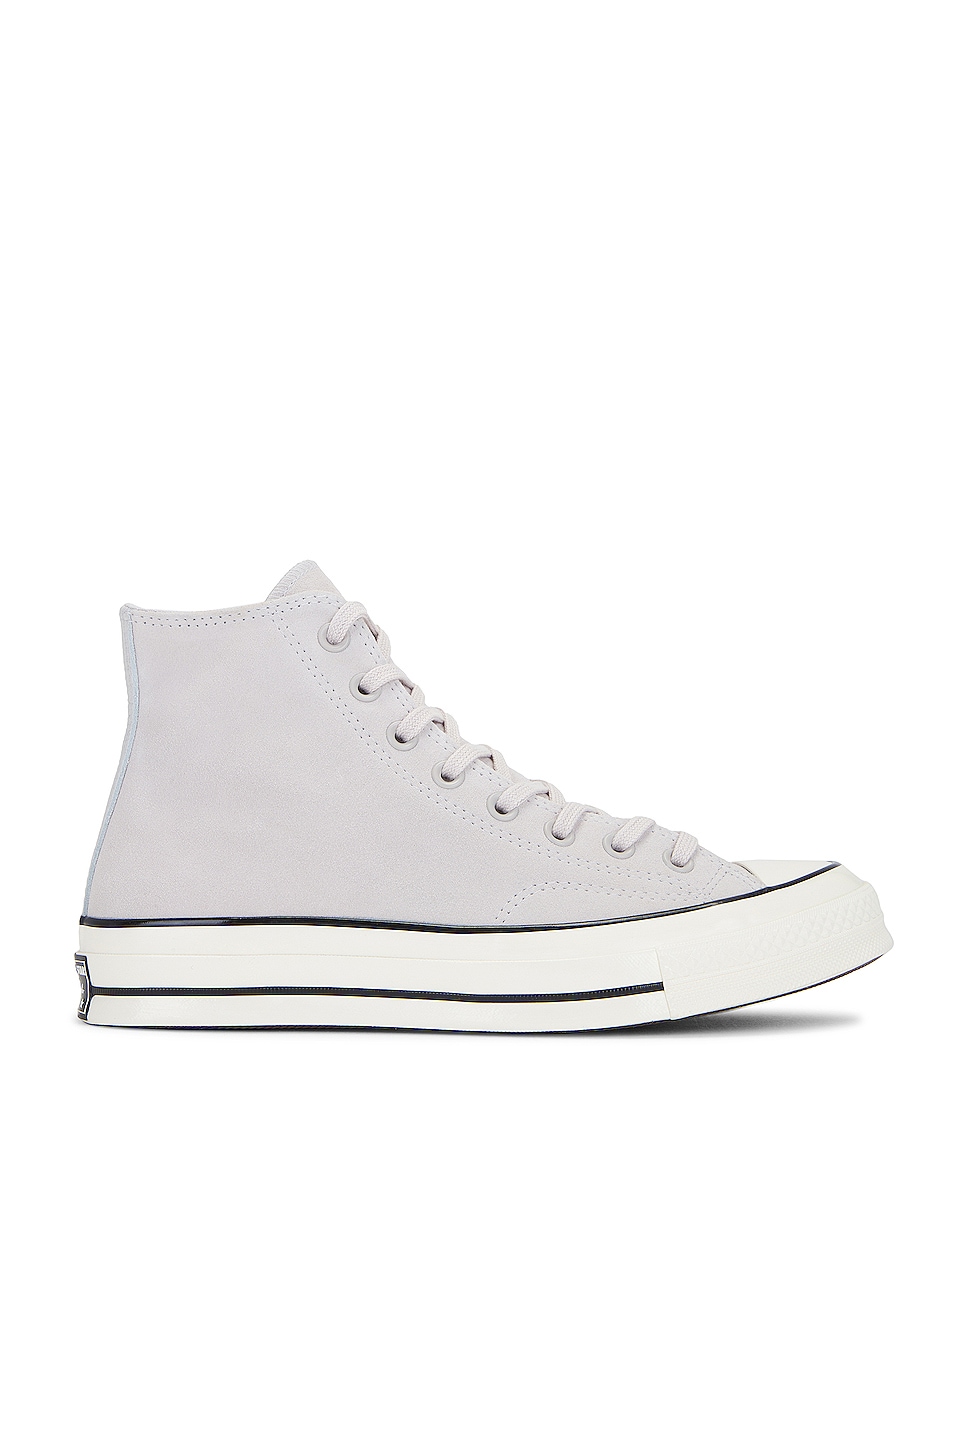 Image 1 of Converse Chuck 70 Seasonal Color Suede Hi Tops in Pale Putty, Egret, Hidden Trail